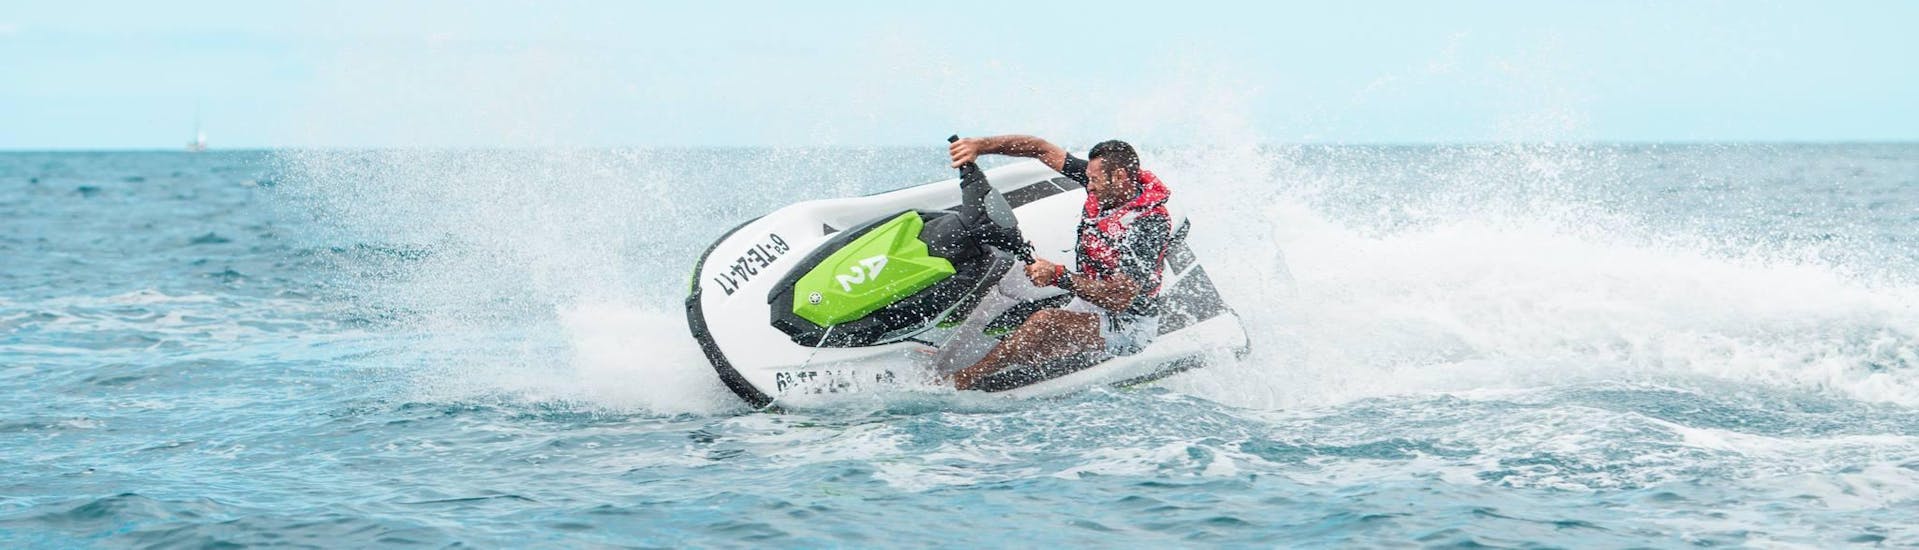 A man on a jetski from Watersports Tenerife at the Jetski Tour los Gigantes in Tenerife. 